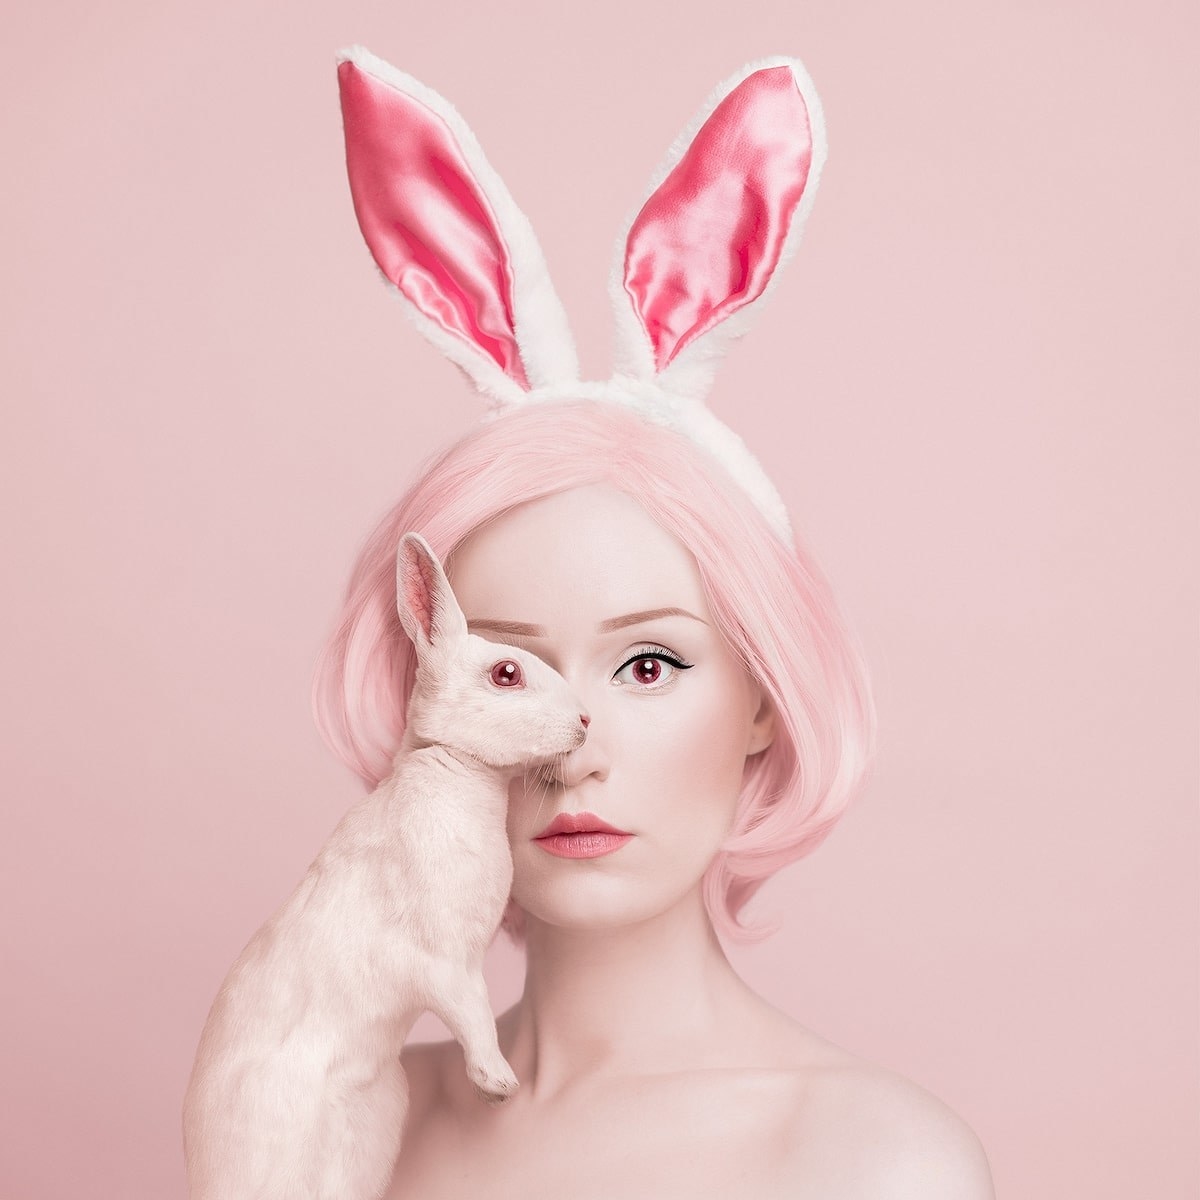 A woman with pink hair wearing bunny ears and holding a rabbit on a pink background 